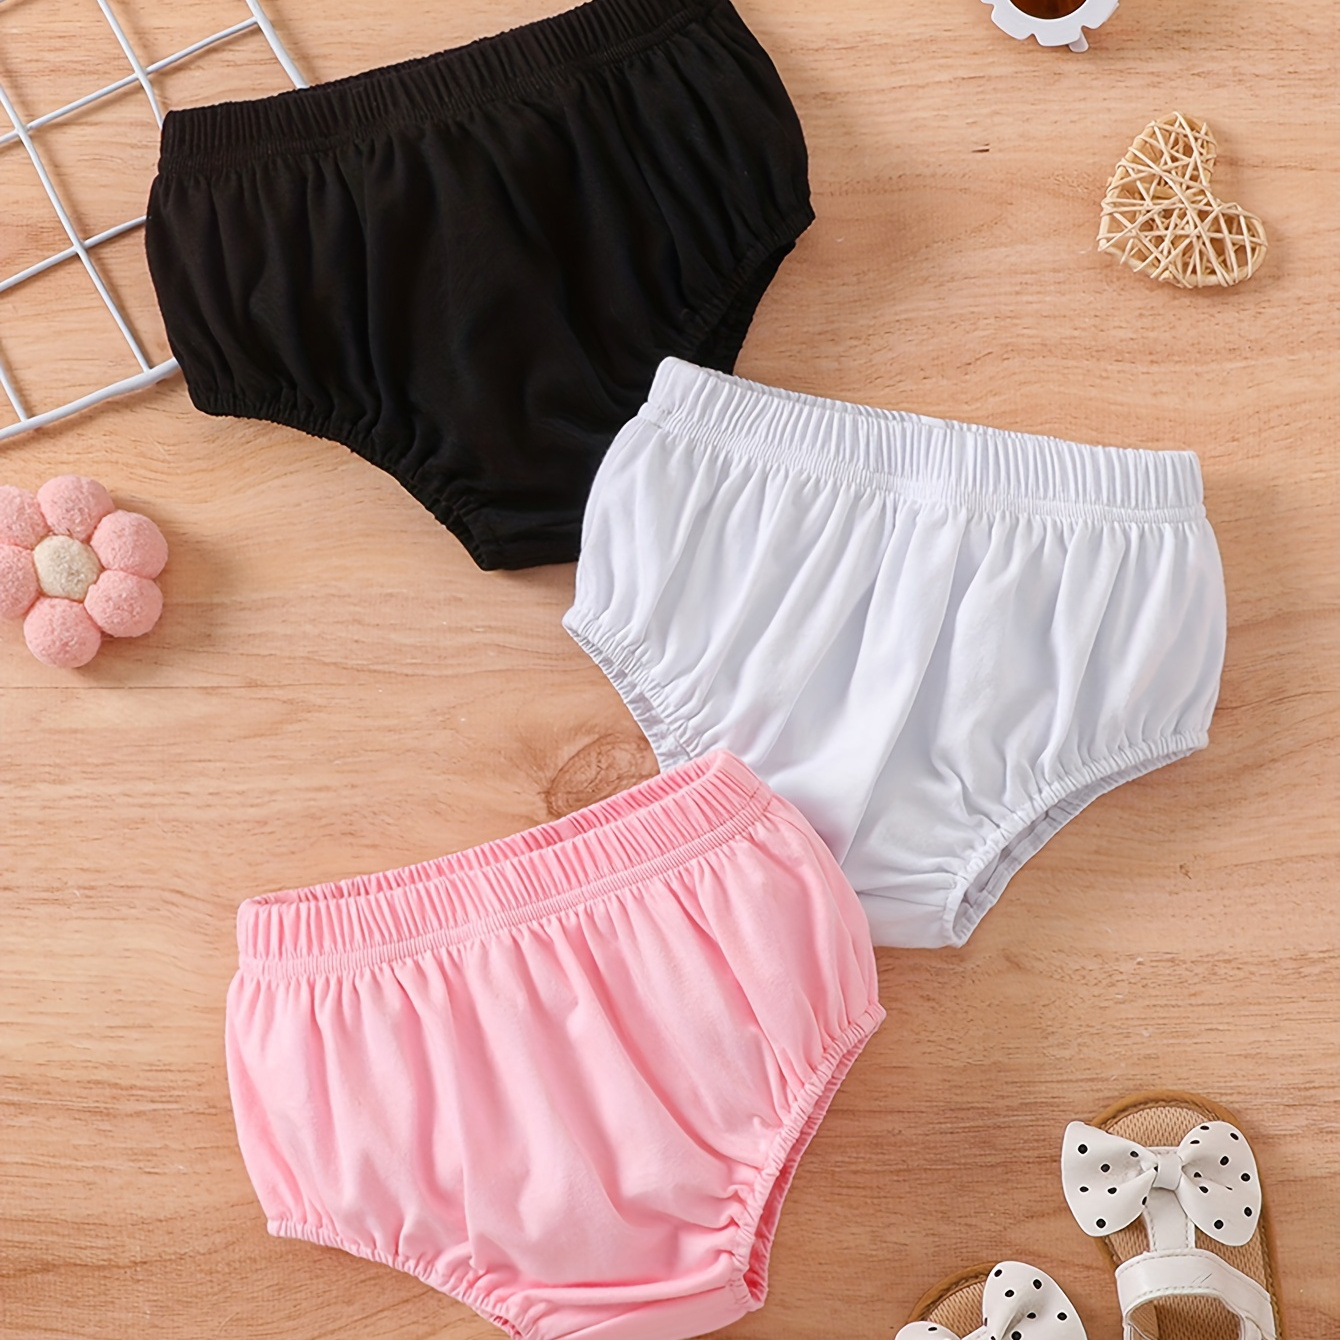 

3pcs Baby's Solid Color Comfy Cotton Shorts, Casual Elastic Waist Bloomers, Infant & Toddler Girl's Bottoms For Summer